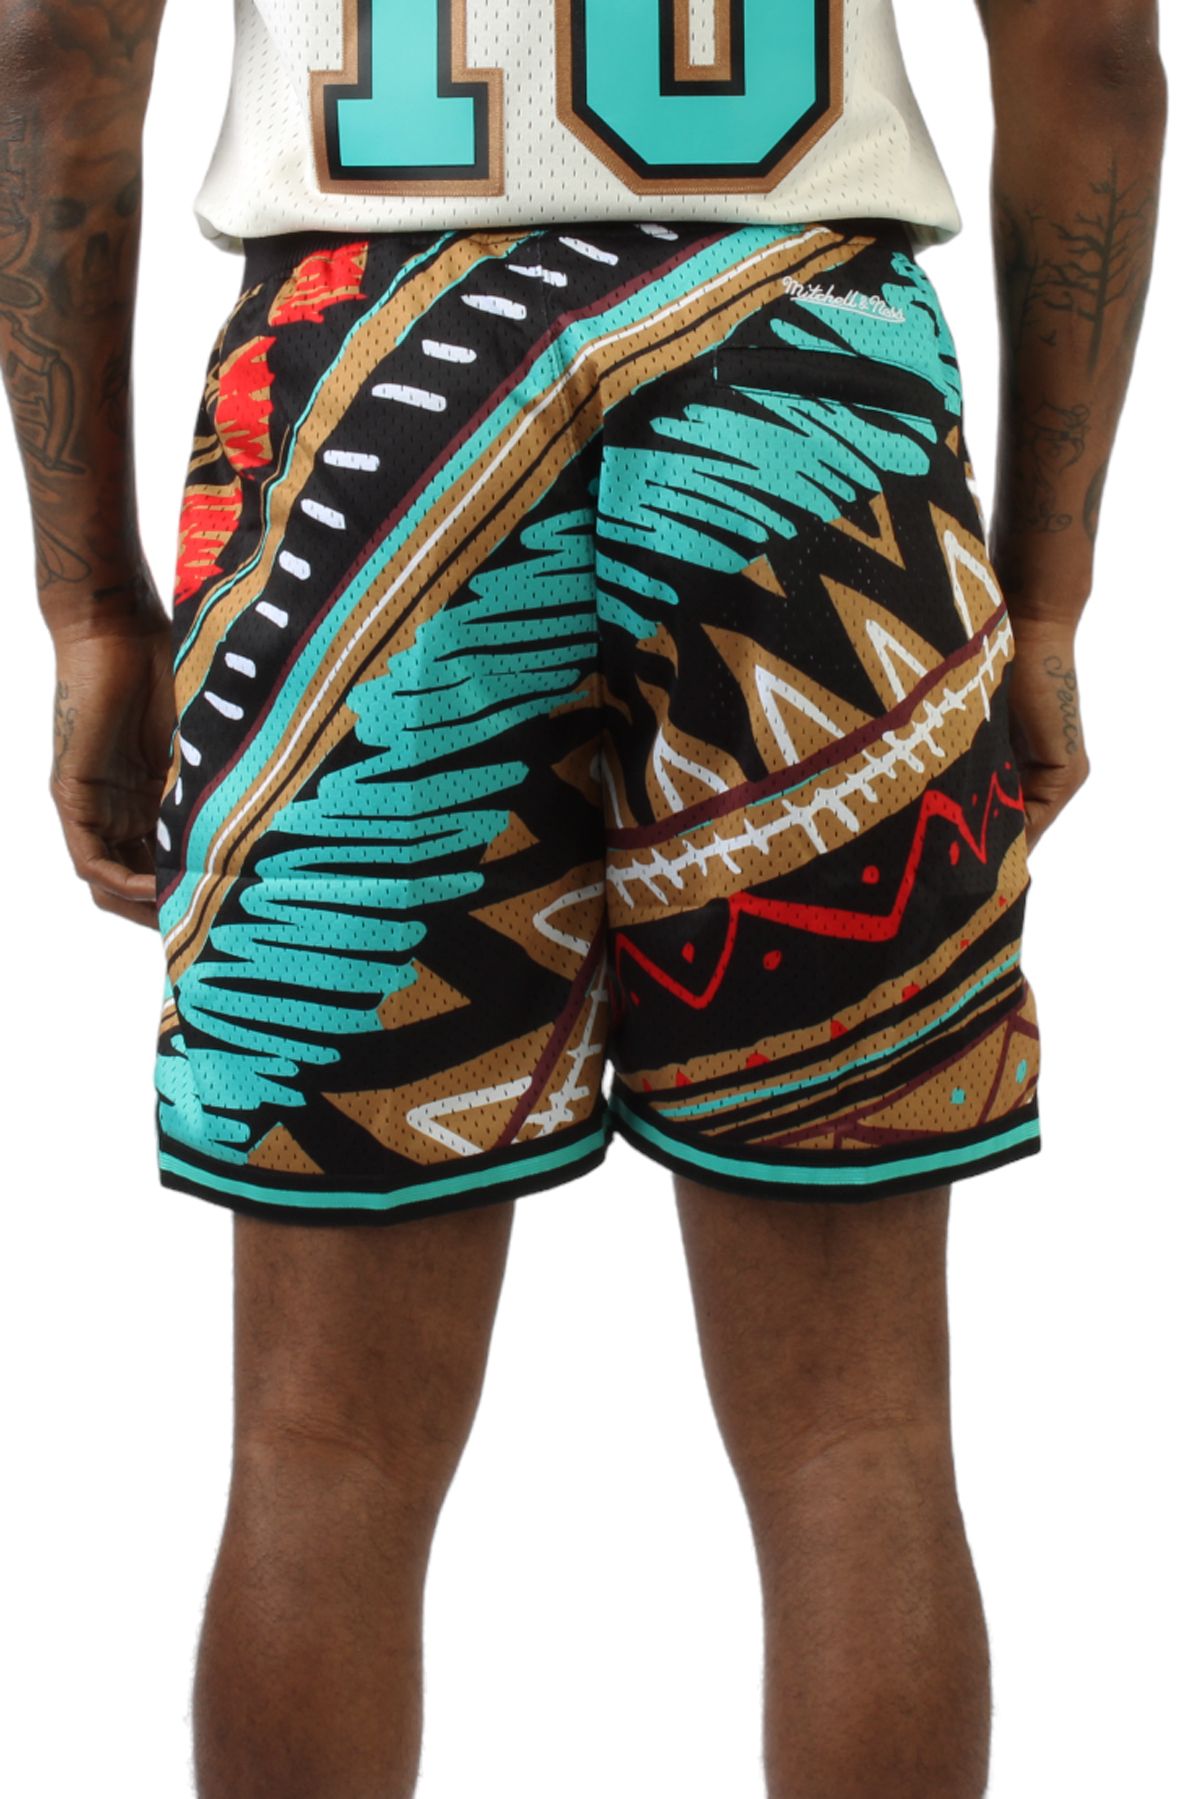 Mitchell & Ness Vancouver Grizzlies Teal Swingman Shorts - Gameday